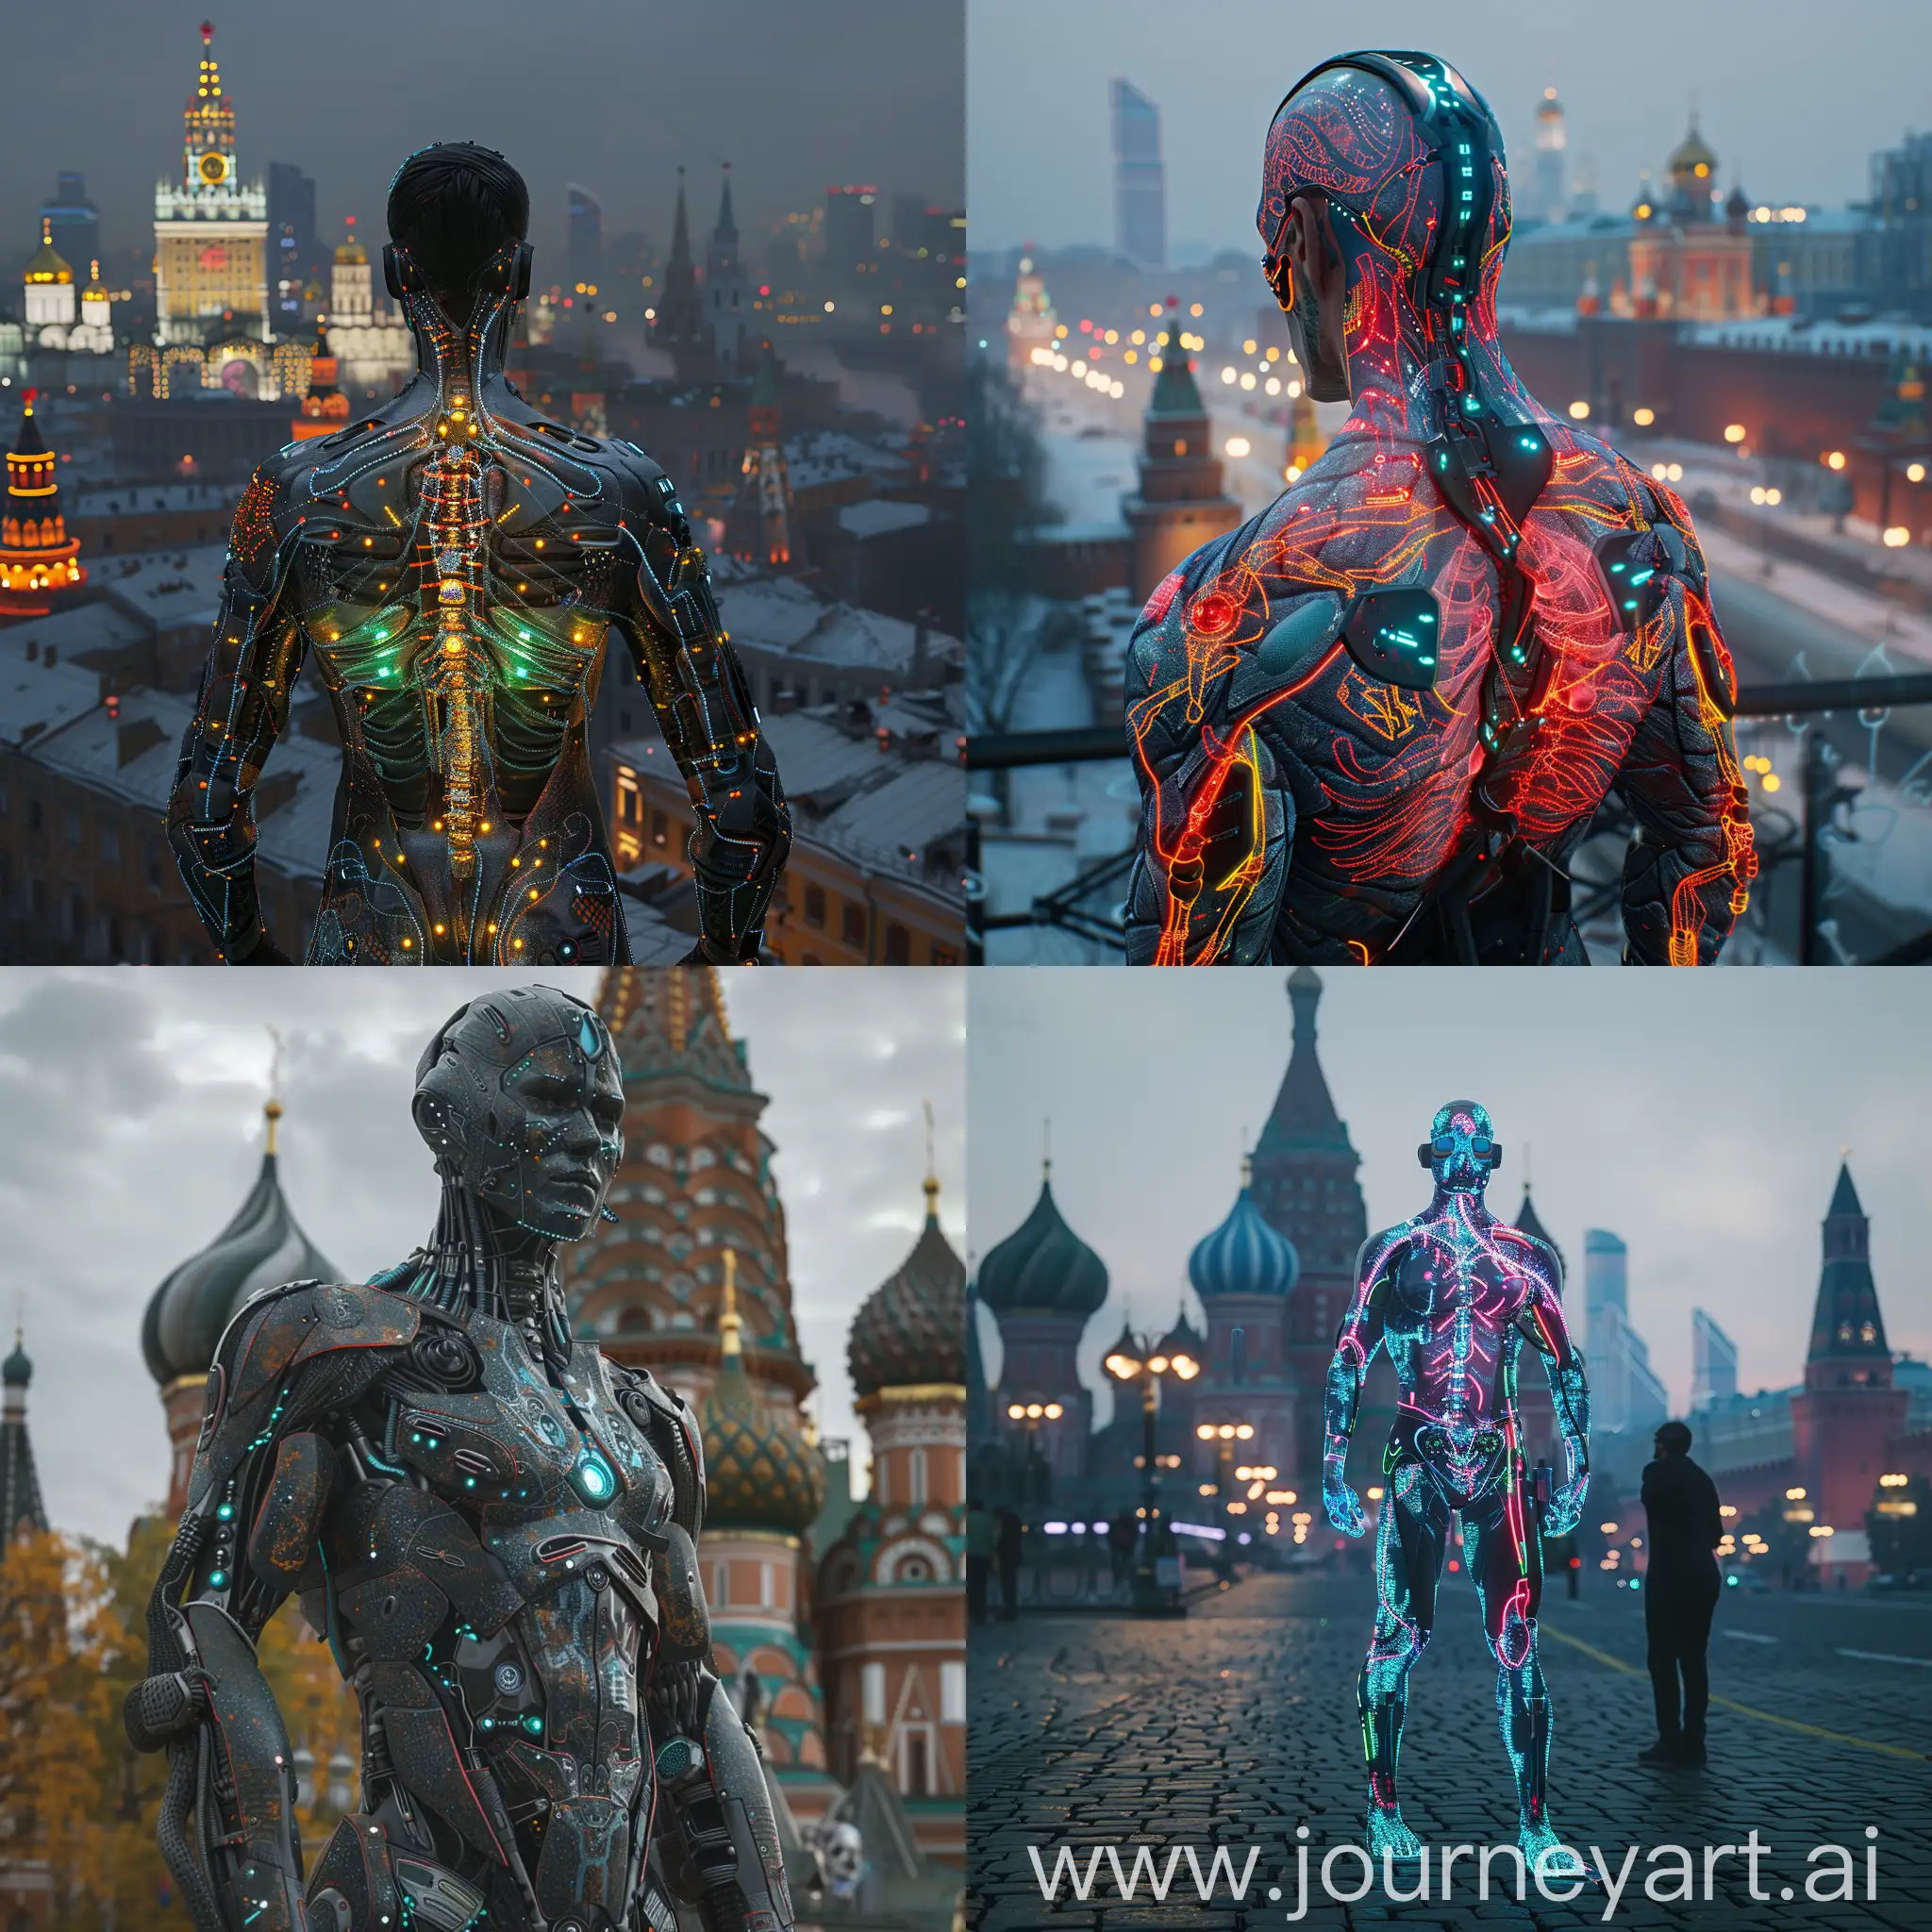 Futuristic Moscow, in futuristic style, Neural Interface Jacks, Bioengineered Organs, Nanotechnological Blood Cleaners, Enhanced Skeletal Structure, Synthetic Muscle Fibers, Smart Skin, Implanted Energy Cells, Bioluminescent Tattoos, Cybernetic Enhancements, Genetic Modifications, Nanotech-infused Fabrics, Bioluminescent Fashion, Organic Armor Plating, Augmented Reality Fashion, Cybernetic Enhancements, Living Architecture, Molecular Fabrication Stations, Symbiotic Transportation, Augmented Reality Graffiti, Genetically Modified Pets, unreal engine 5 --stylize 1000